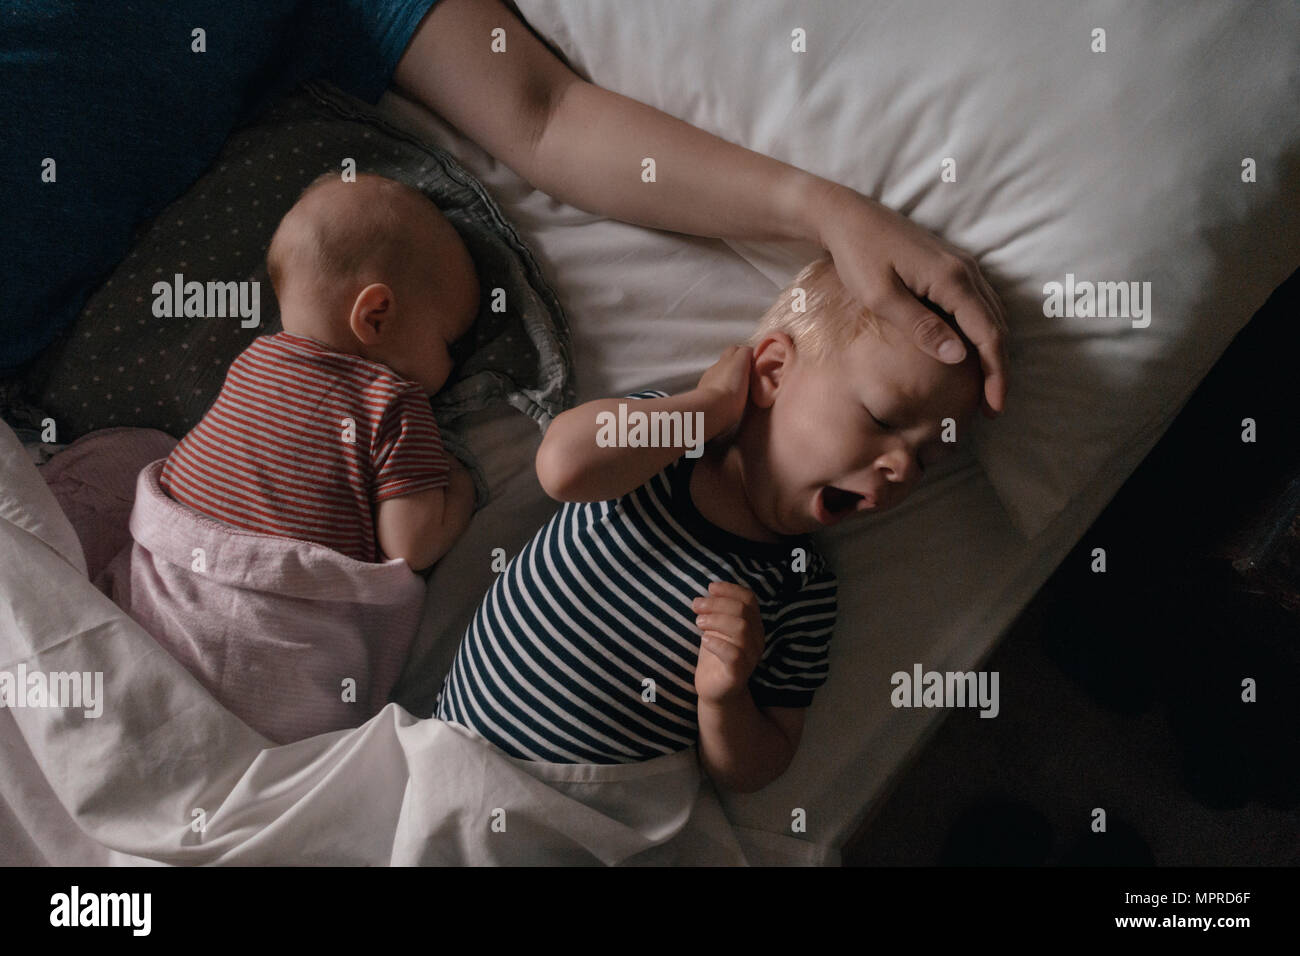 Vater lying next to his daughter and son in bed Stock Photo